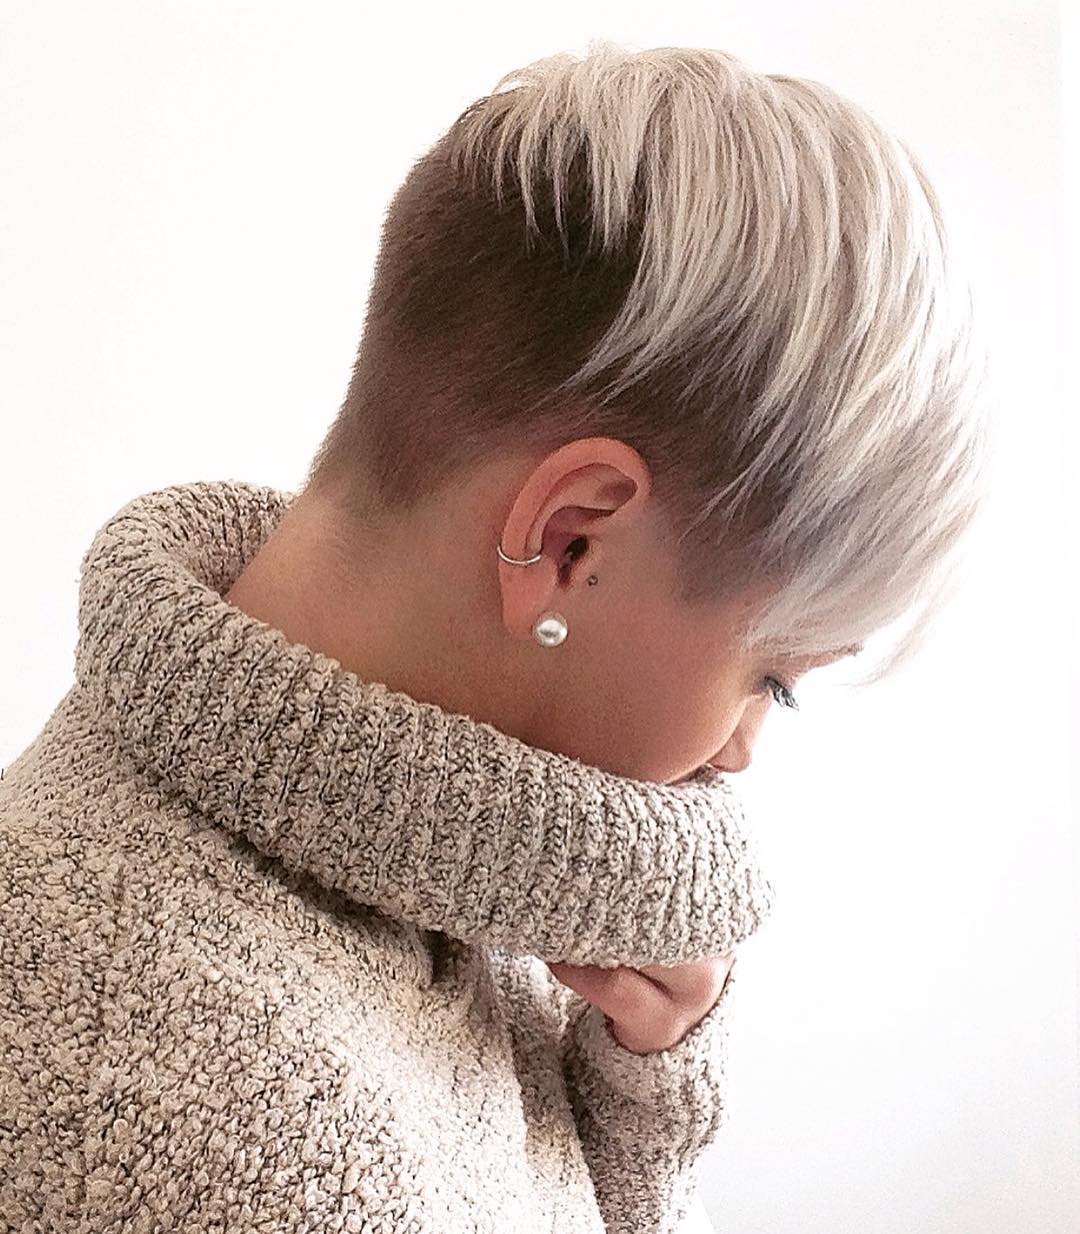 Stylish Pixie Haircut for Women, Short Hairstyle and Color Ideas